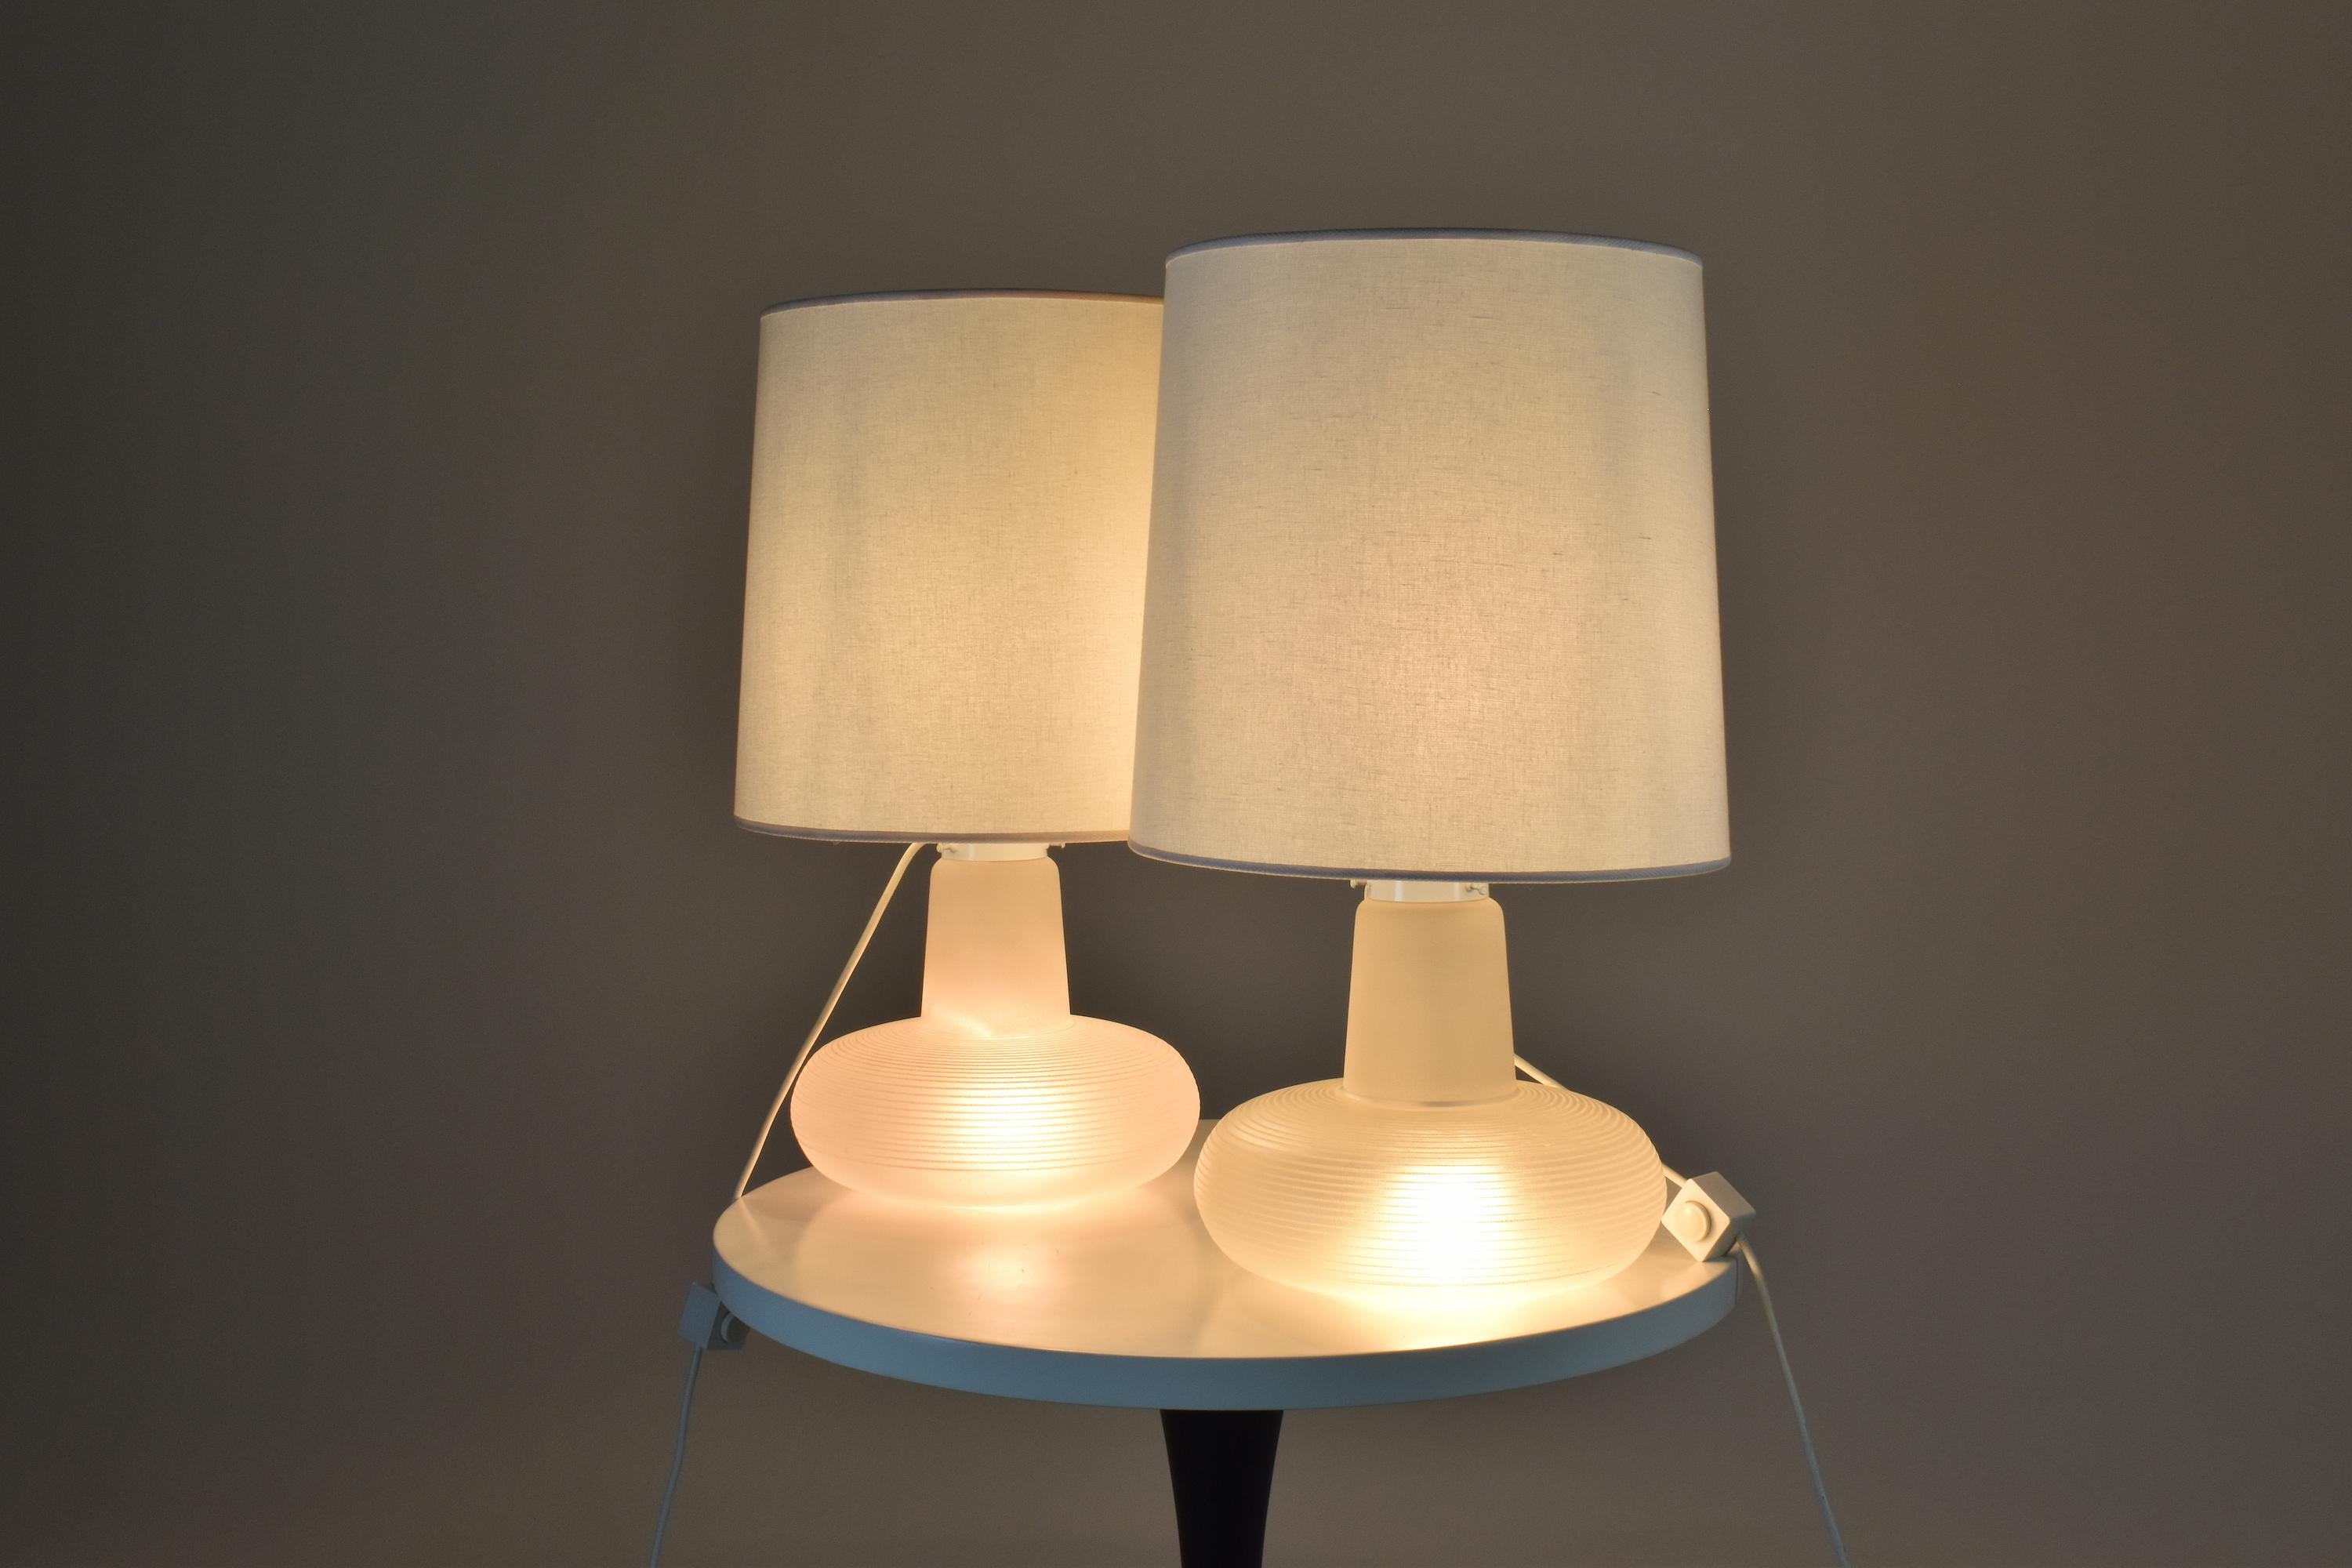 Fantastic set of two curvacious vintage 20th-century table lights attributed to Italian Murano glass expert Carlos Nason for Mazzega around 1960-1970. The beautiful transparent glass is sandblasted at the top and designed with horizontal lines